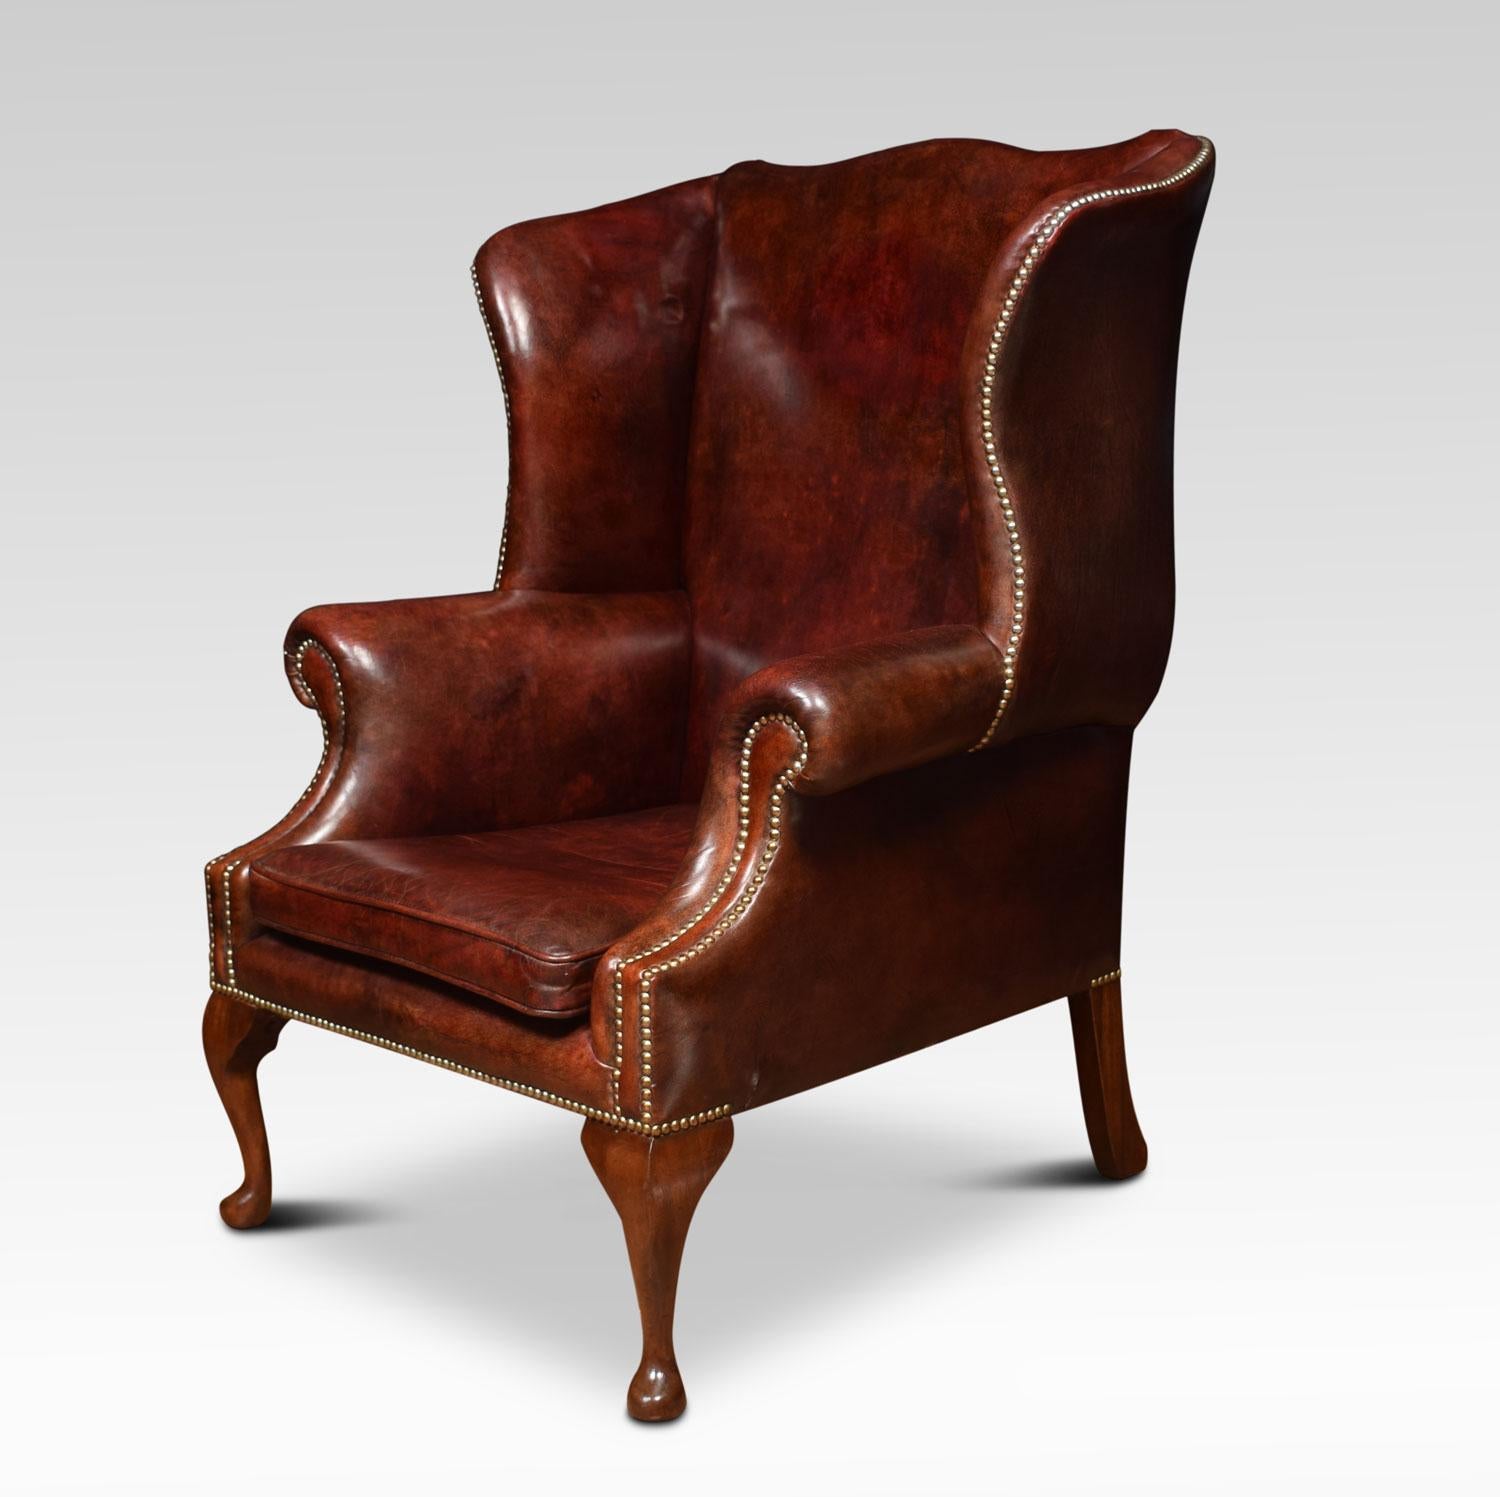 Oversized mahogany framed wing armchair of generous proportions, the arched top above Leather upholstered back, arms and seat. All raised up on cabriole front legs.
Dimensions
Height 43 inches height to seat 17.5 inches
Width 33 inches
Depth